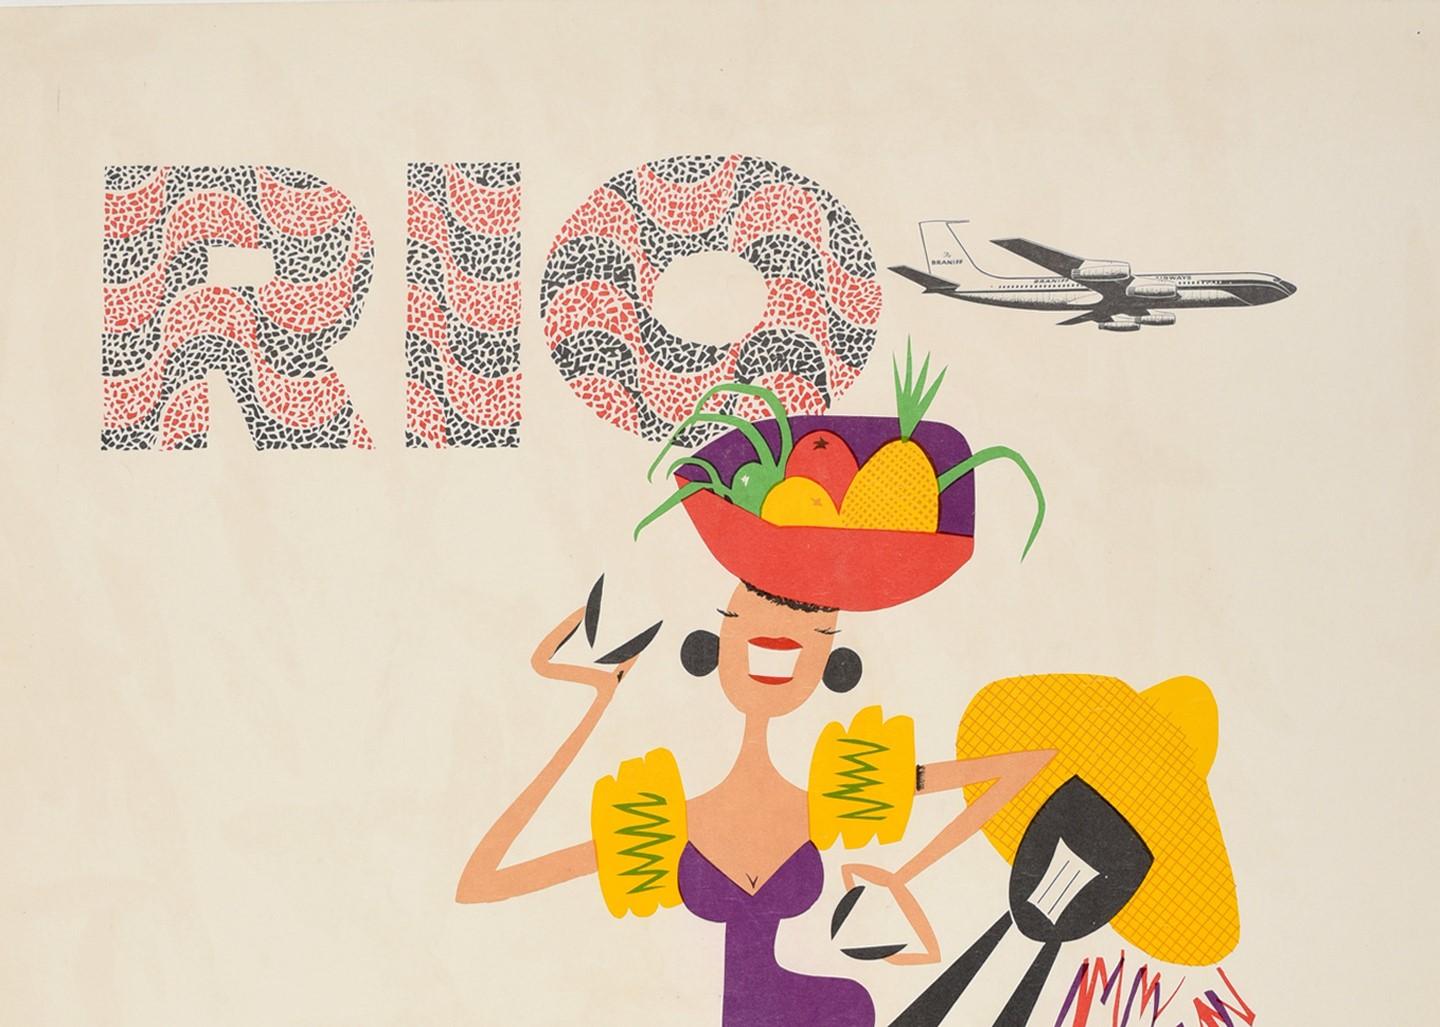 Original vintage travel poster for Rio de Janeiro issued by Braniff International Airways featuring a colourful illustration of smiling lady dancing and playing music with finger cymbals on each hand, wearing a traditional Brazilian dress and